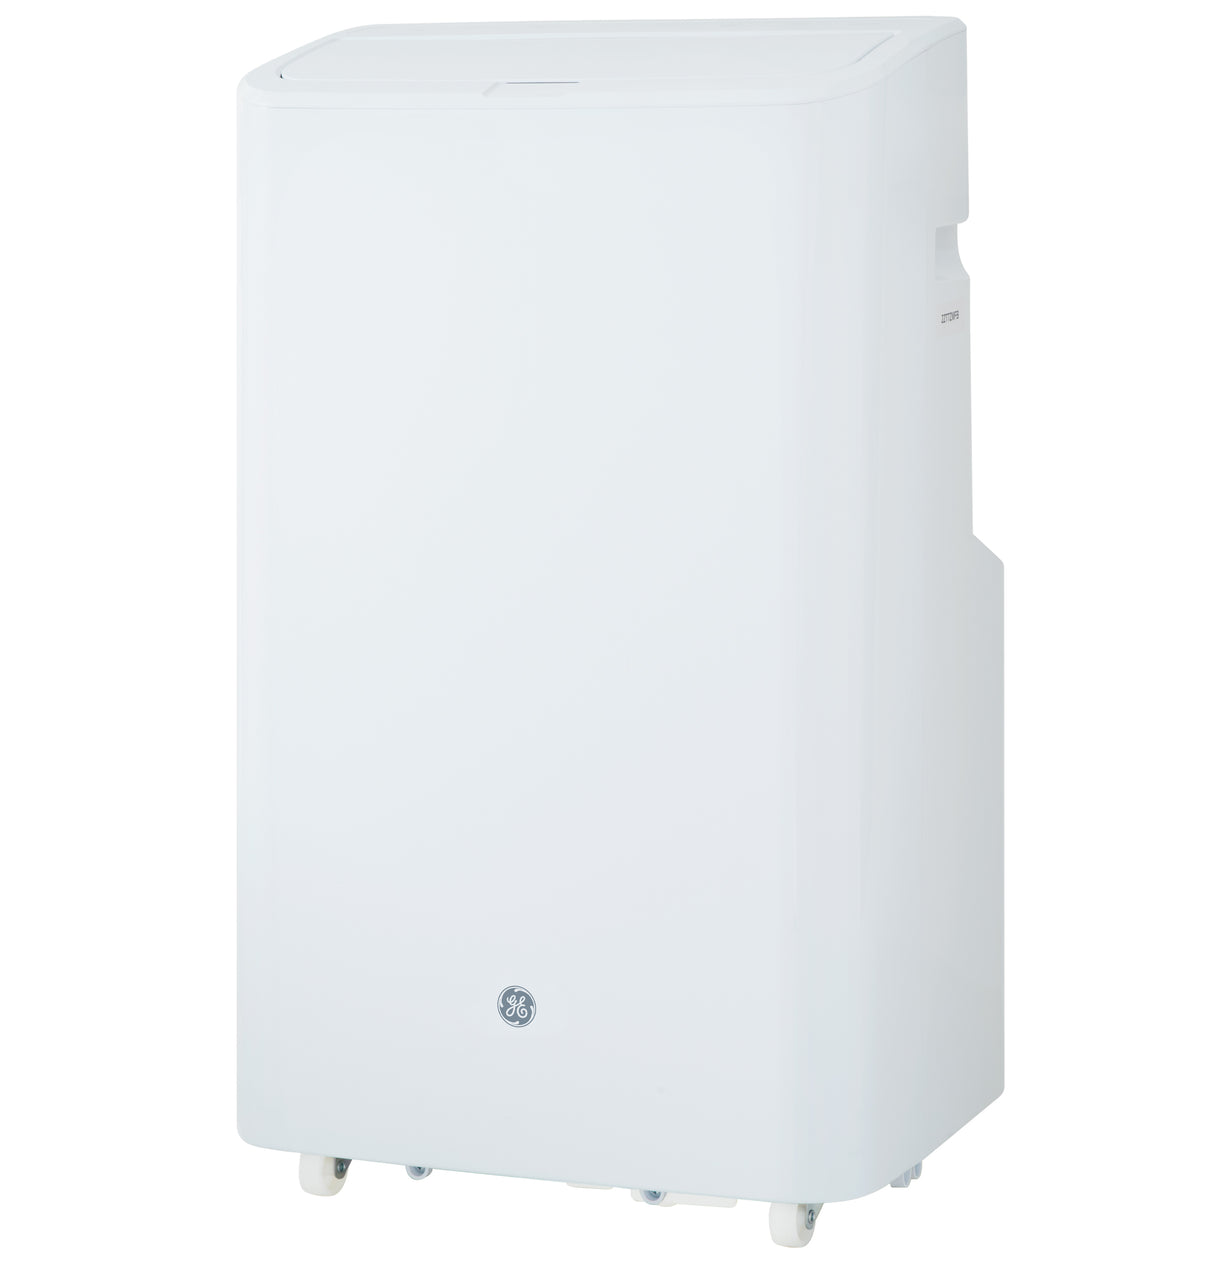 GE(R) 8,500 BTU Portable Air Conditioner with Dehumifier and Remote, White - (APCD08JASW)